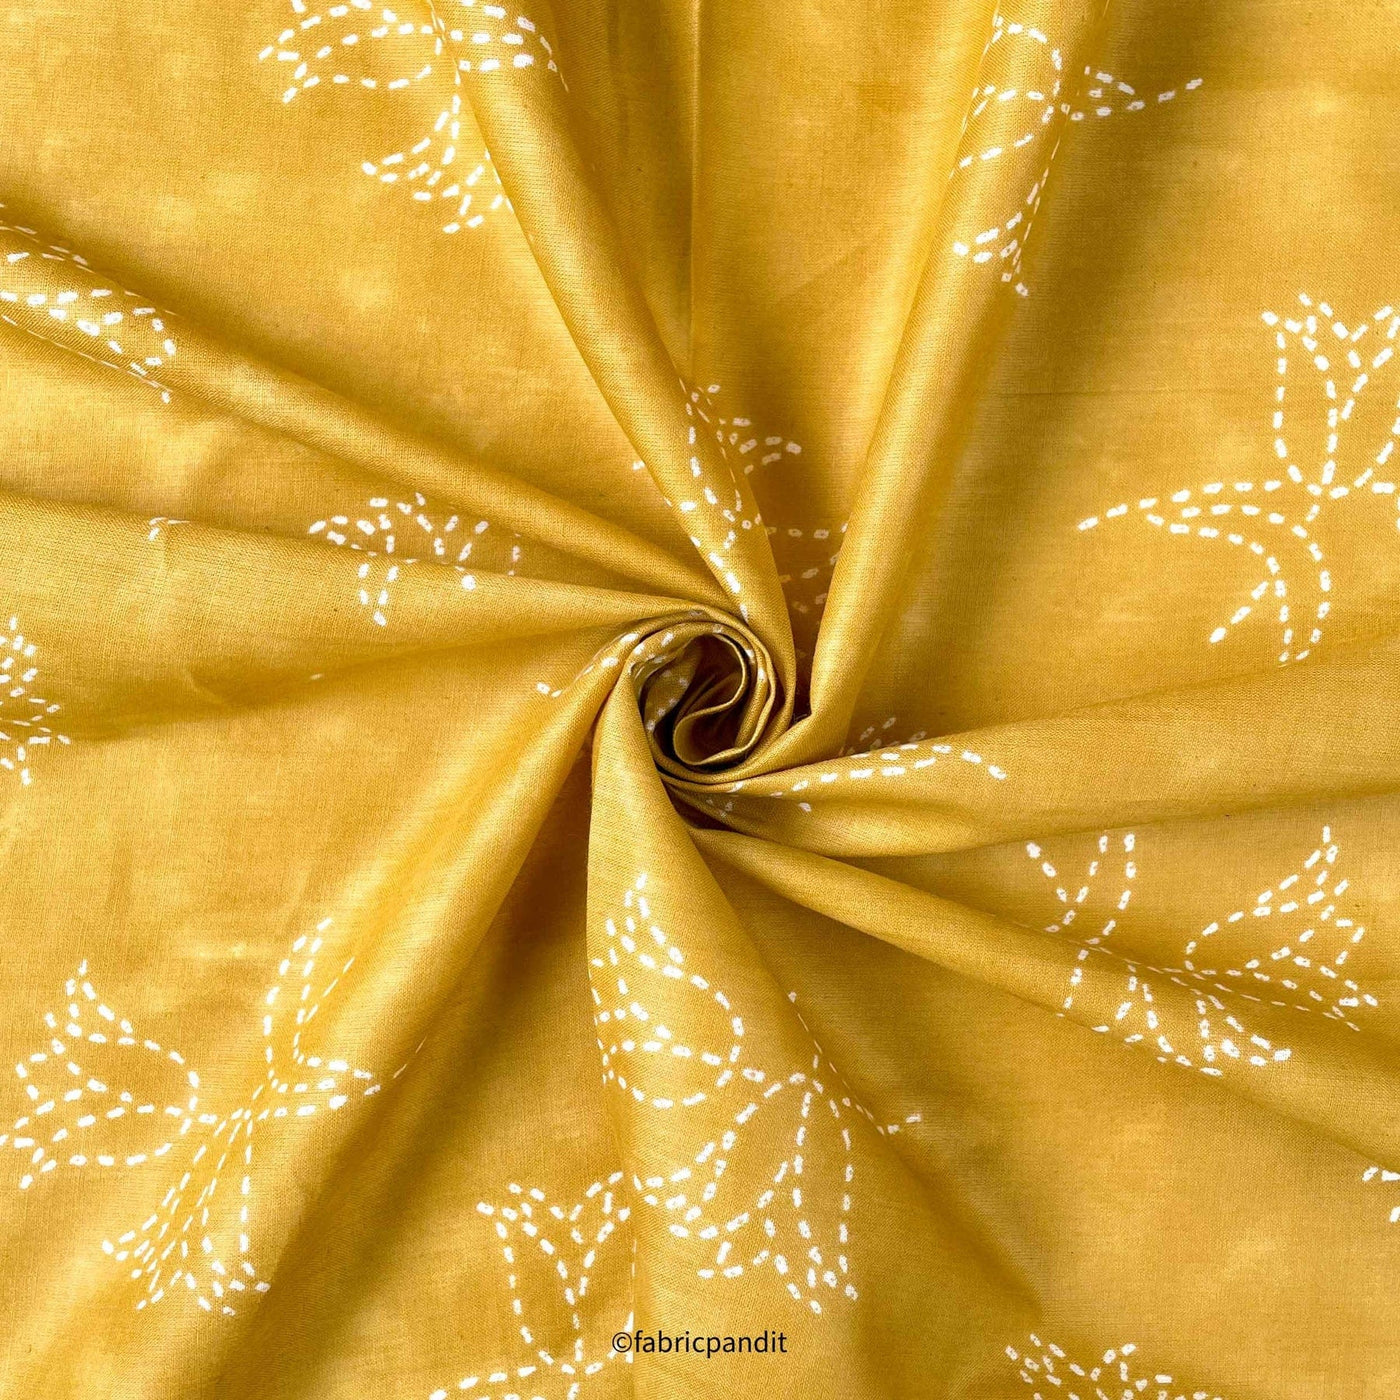 Fabric Pandit Fabric Dusty Yellow & White Dancing Rose Batik Natural Dyed Hand Block Printed Pure Cotton Fabric (Width 42 inches)